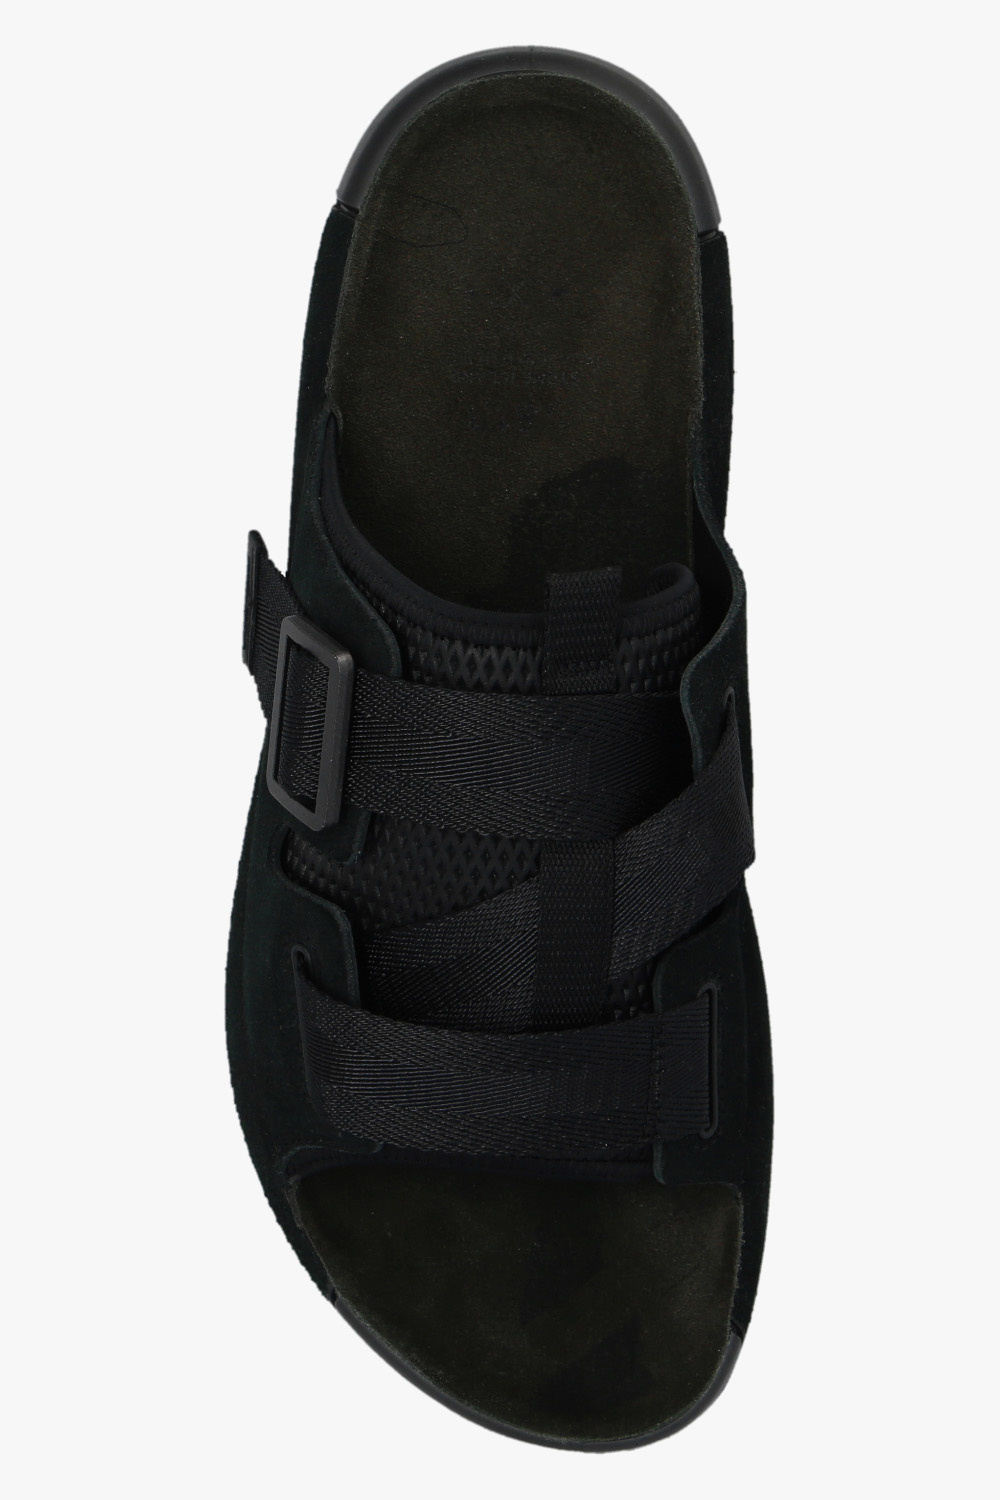 Stone Island Vagabond Marja heeled ankle boots with stitching in black leather